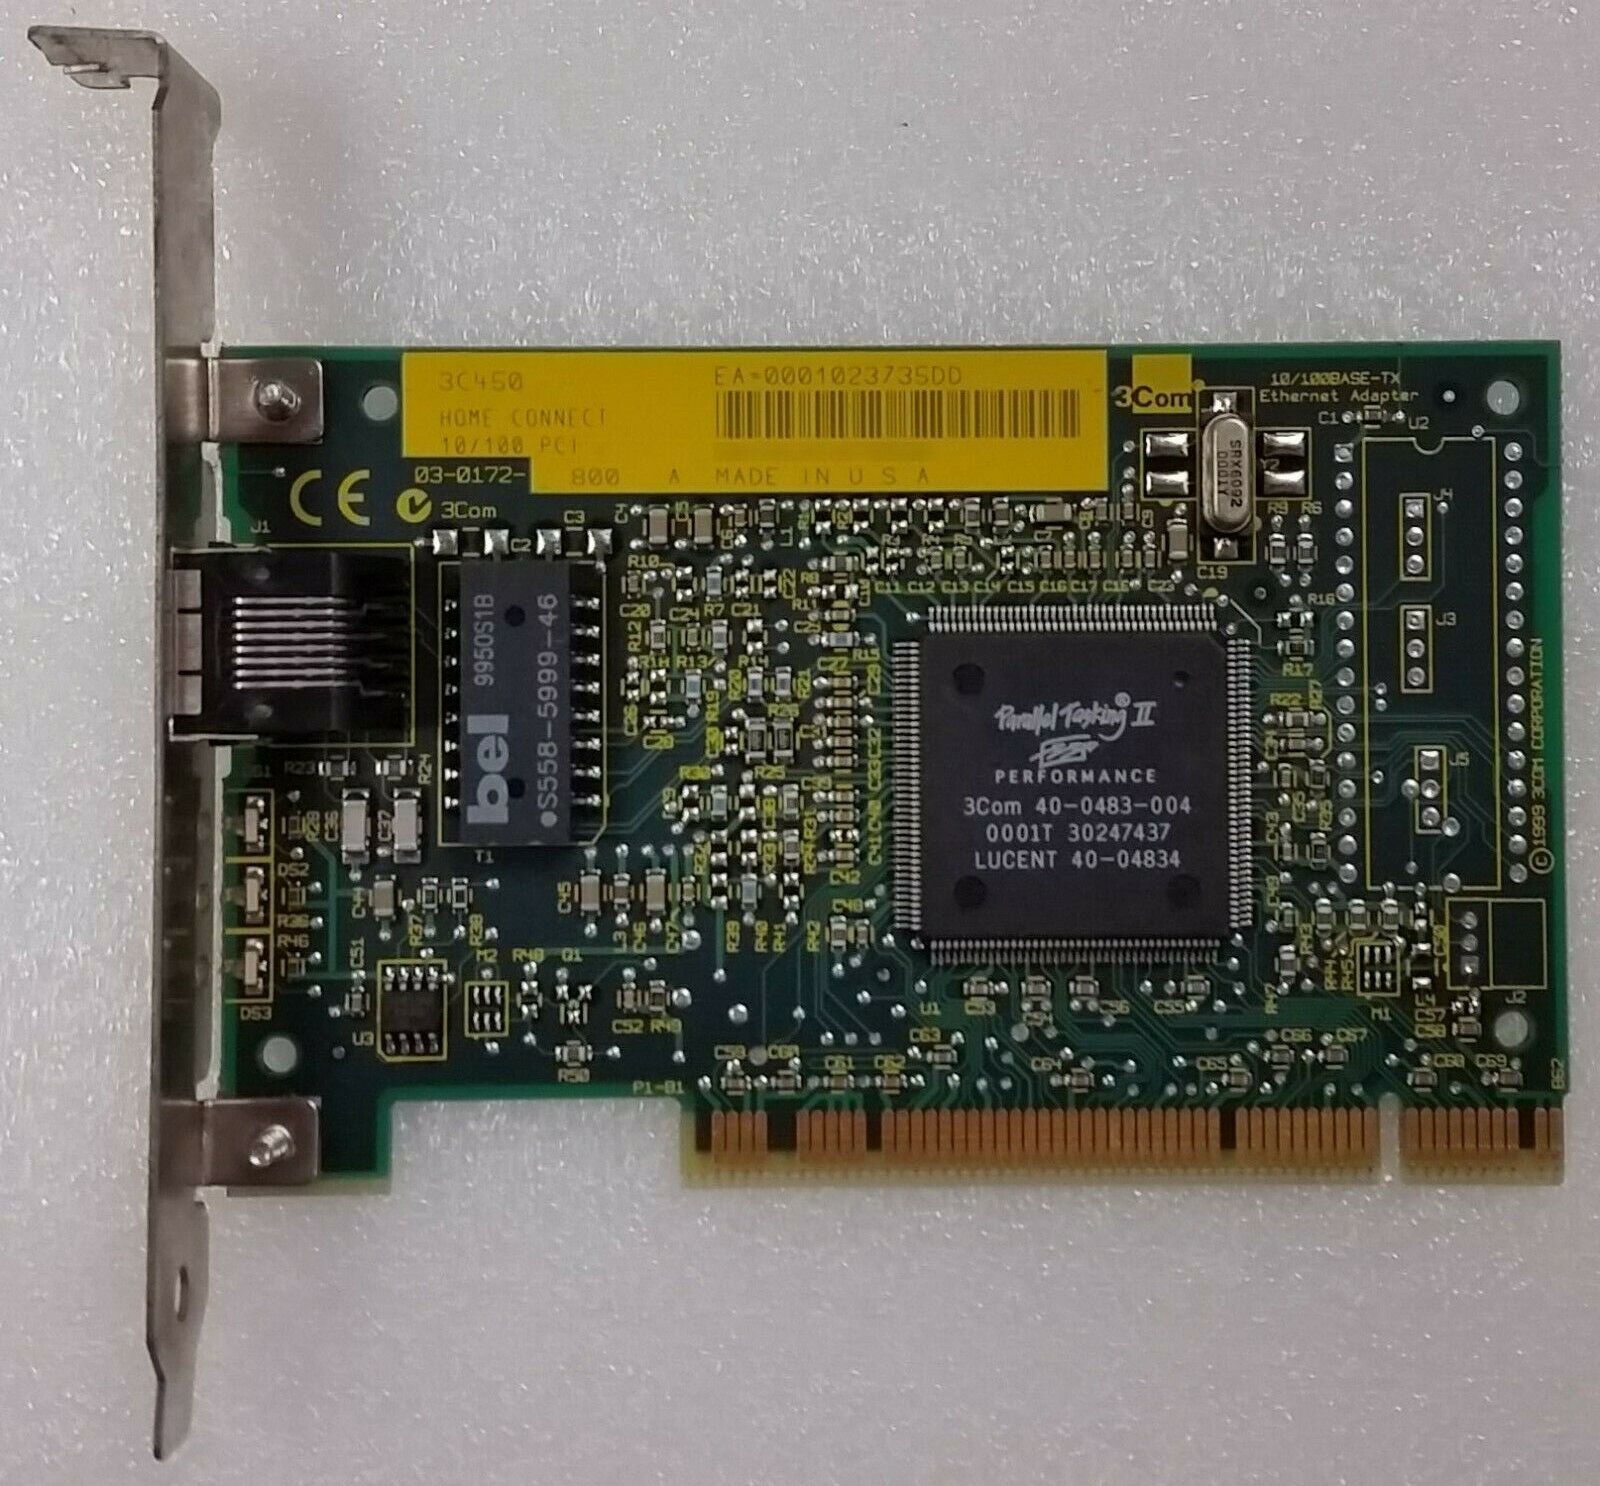 3Com Home Connect 3C450, PCI 10/100 Fast Ethernet Adapter 03-0172-800 A, Refurb